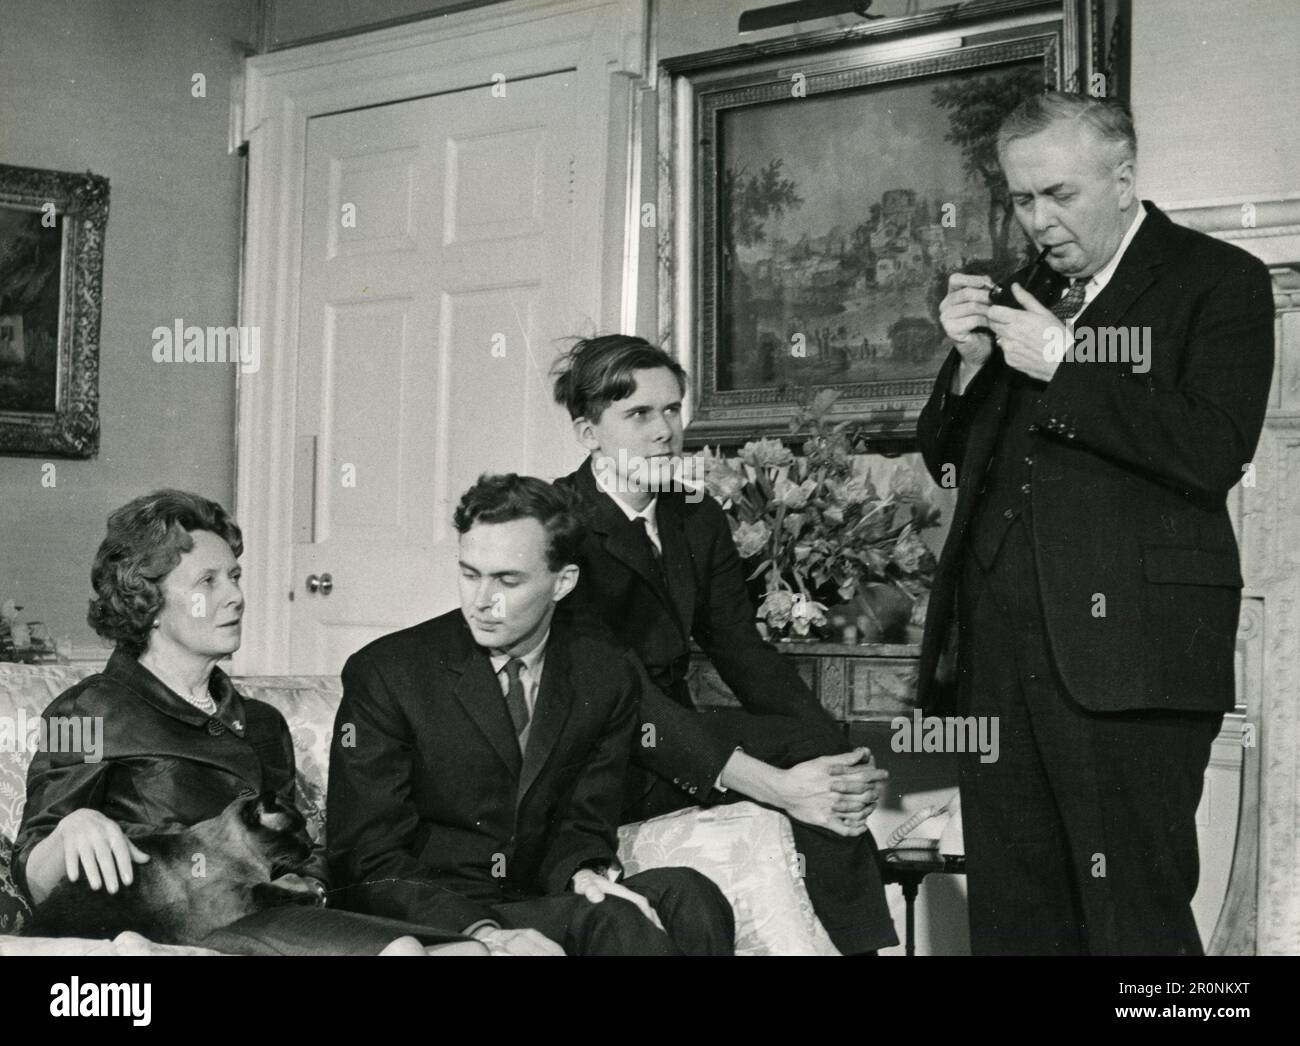 Britain's Premier Harold Wilson with his wife and family at their official residence at 10 Dowing Street, London England, 1965 Stock Photo